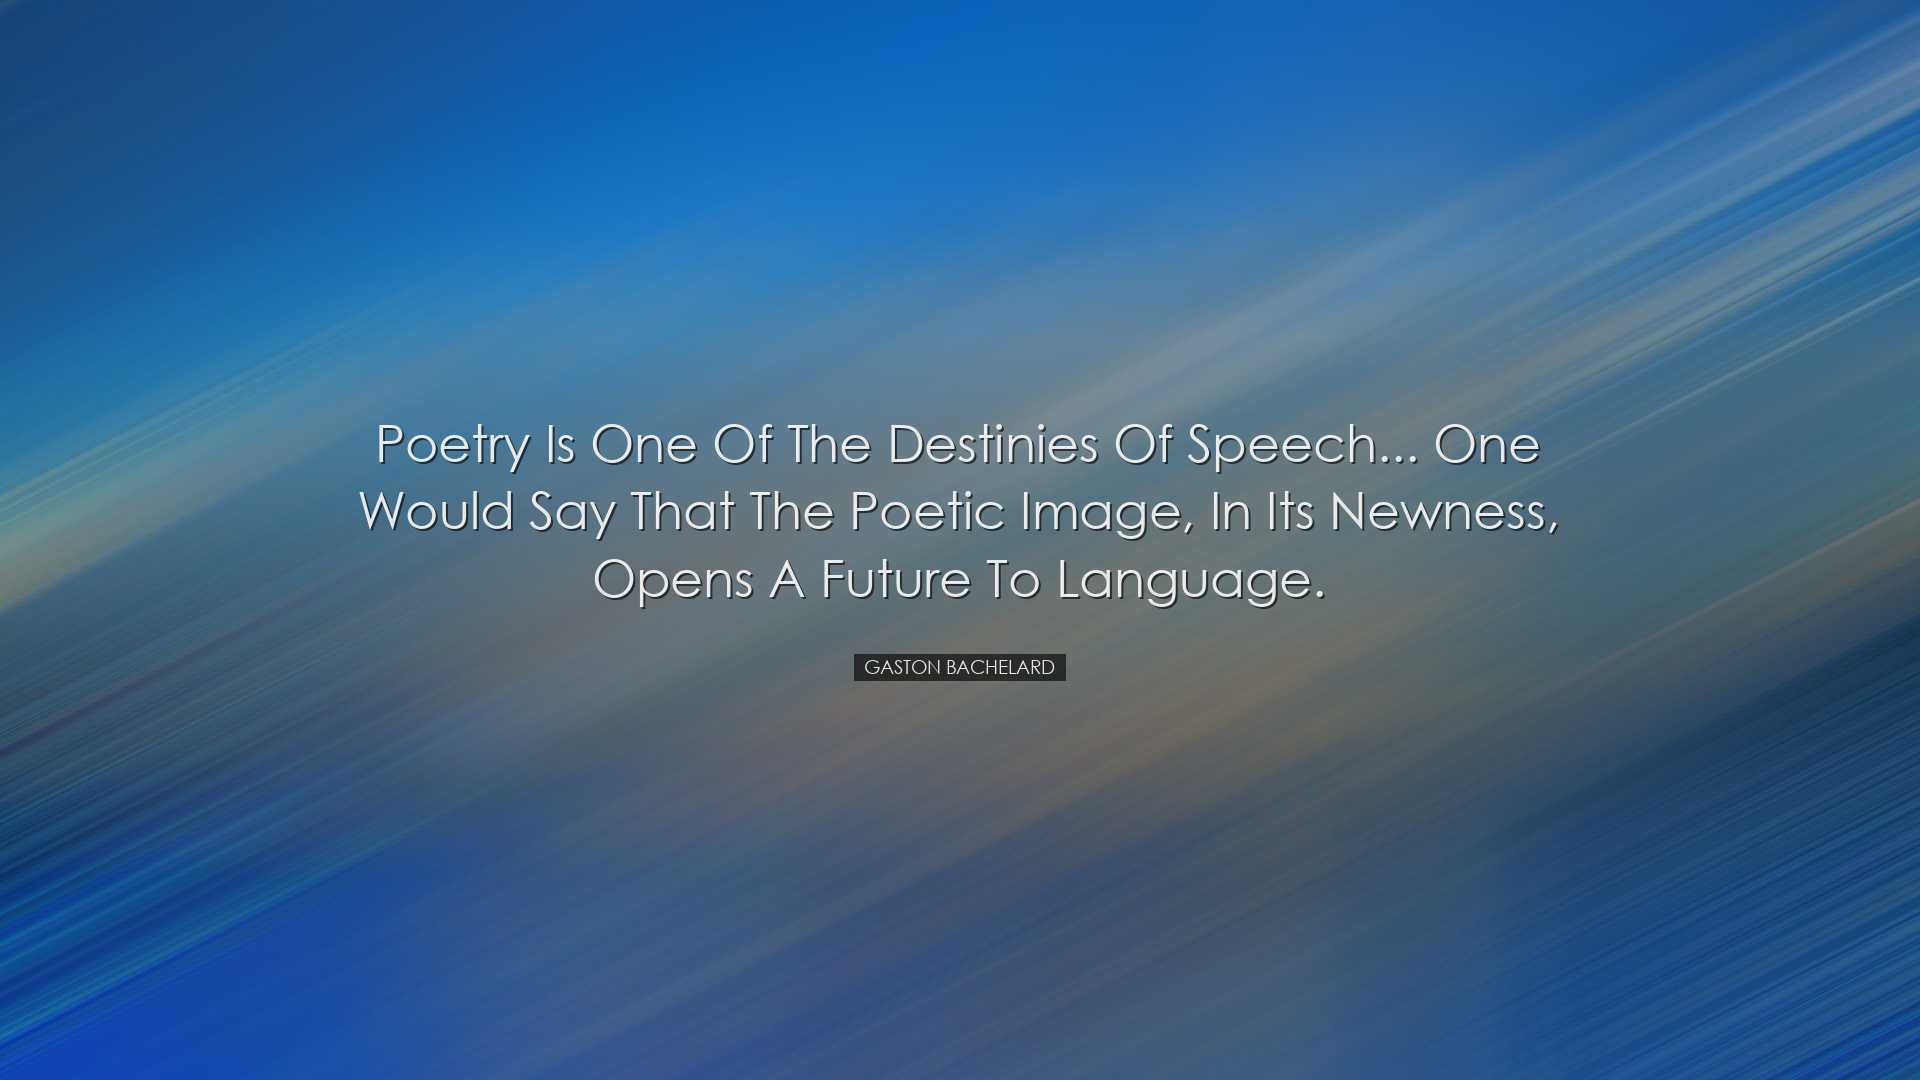 Poetry is one of the destinies of speech... One would say that the